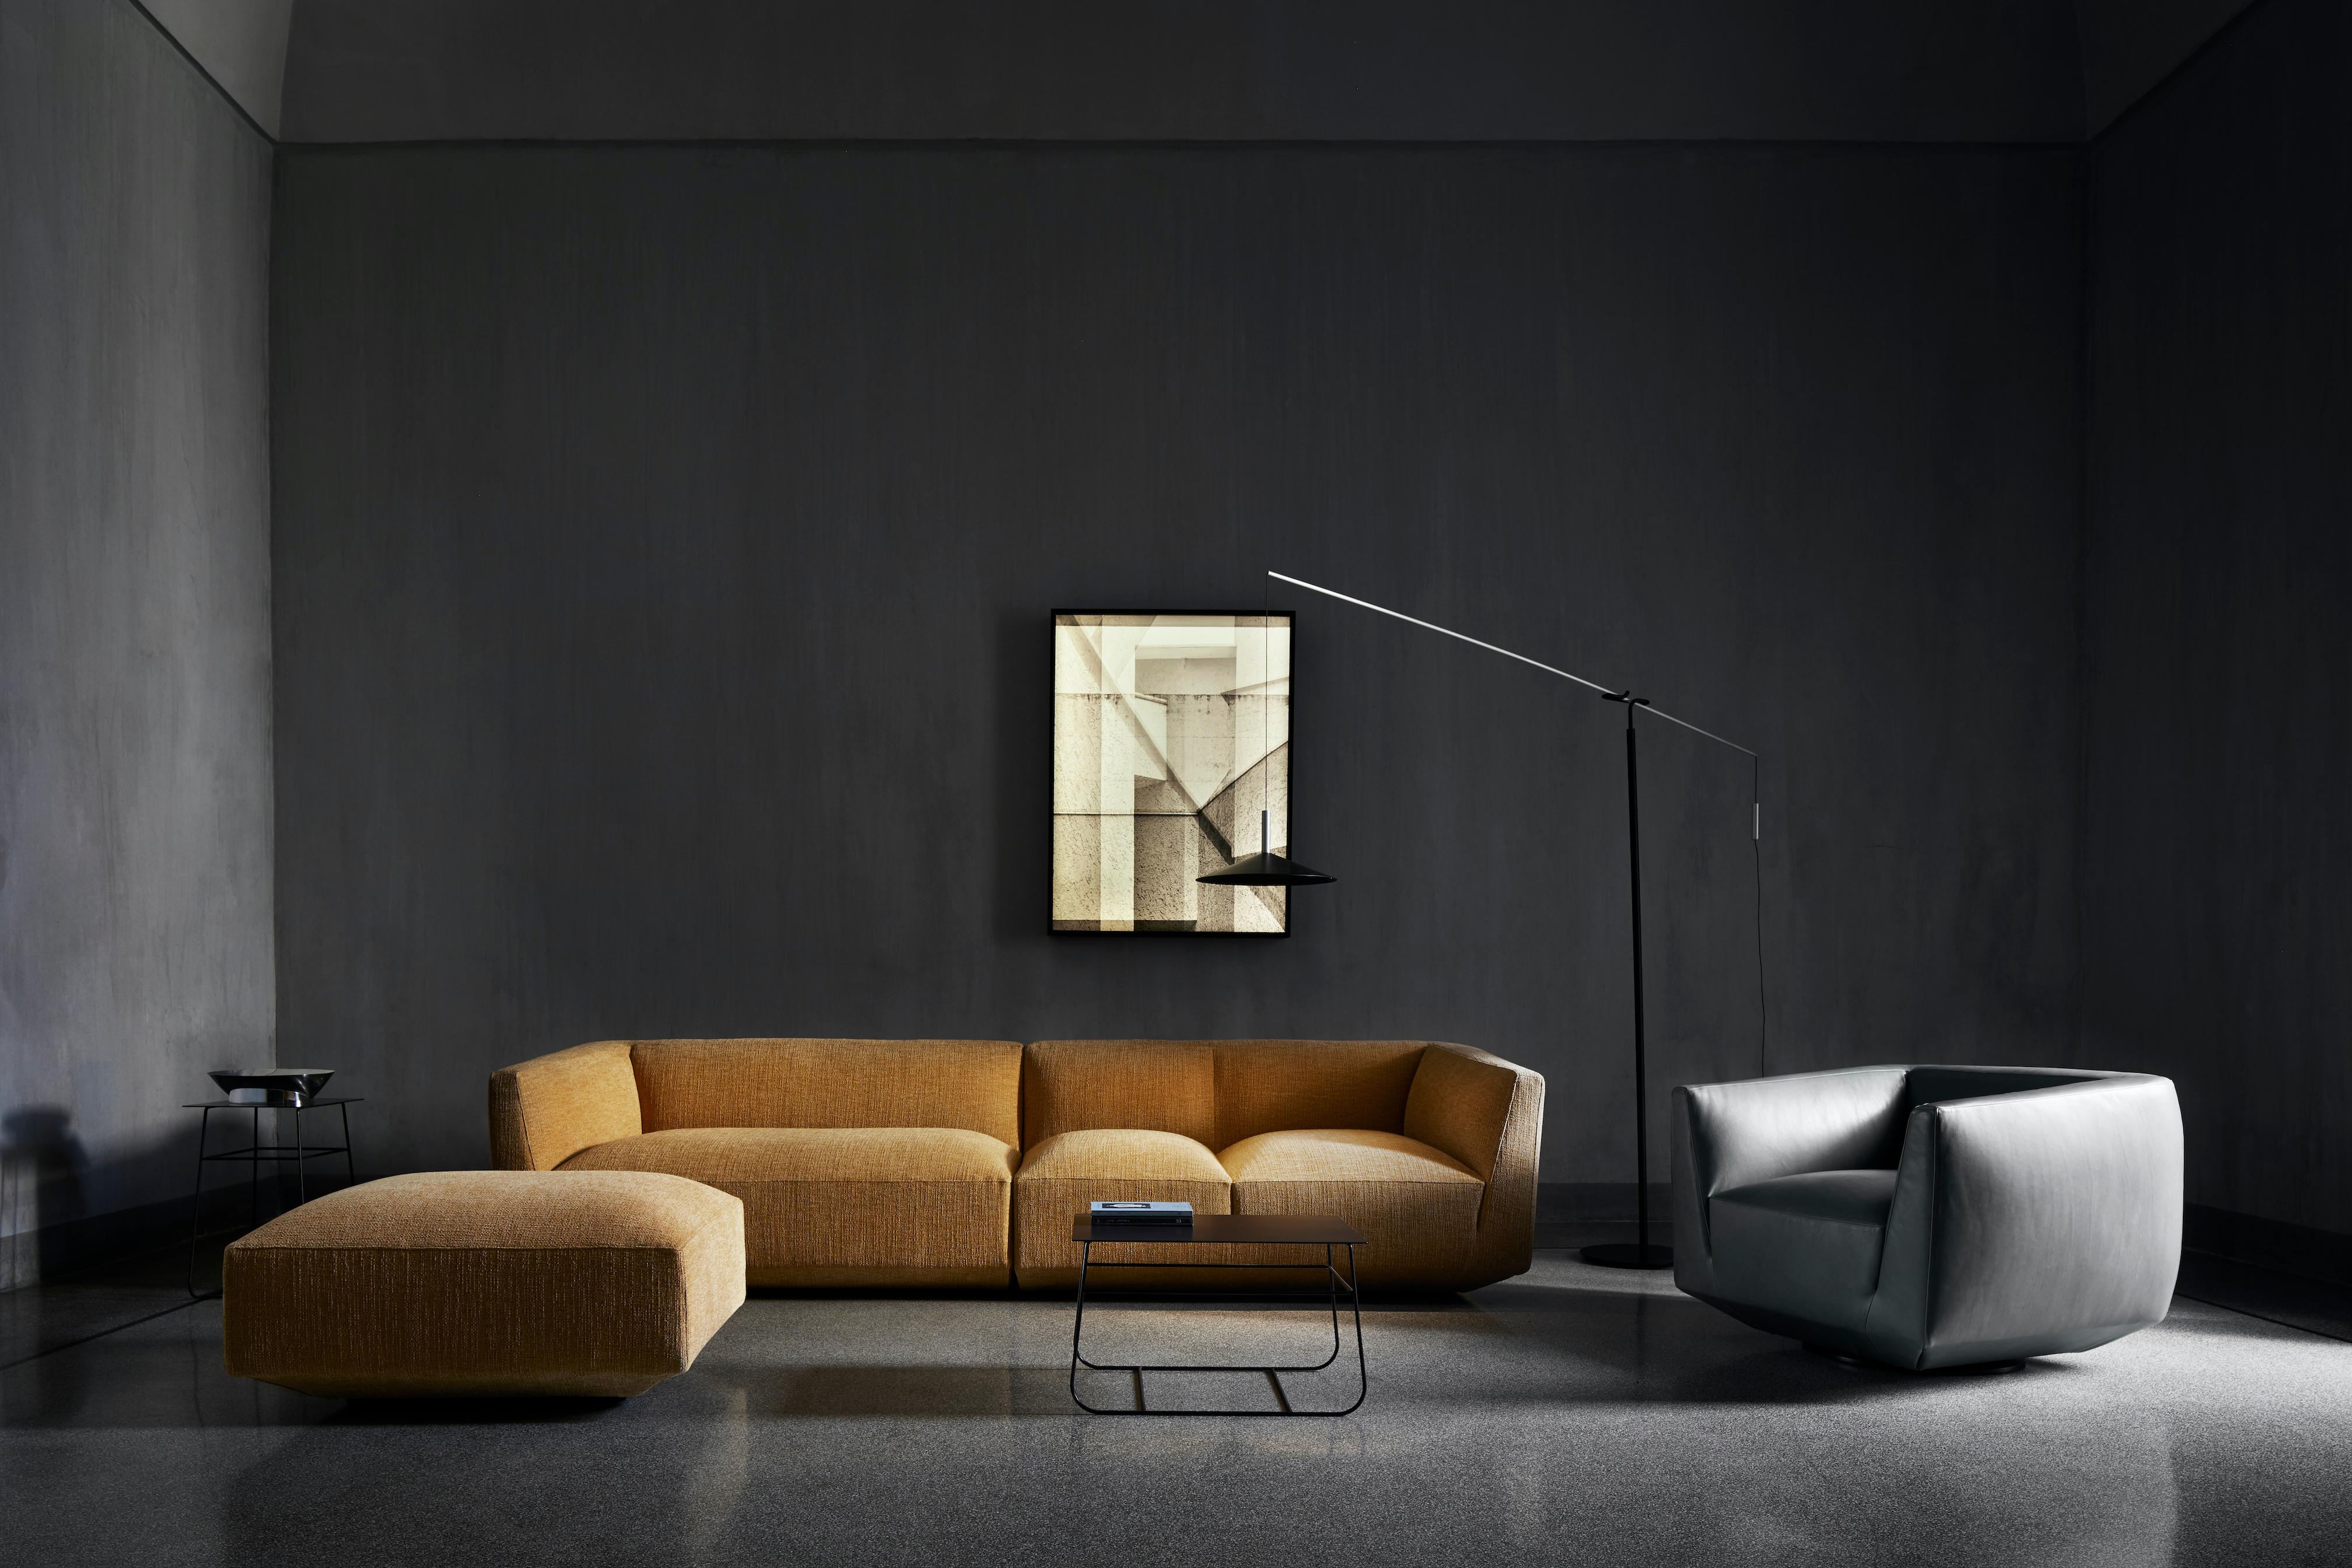 Panis sofa by Amura Lab.
Setup 215l + 216.

Dimensions : H. 70 x 296 x 92 cm.

Fabric reference in picture : Siena 06

More modules available in different fabrics and colors.
 
“Soft shapes declinable in all possible configurations”. The